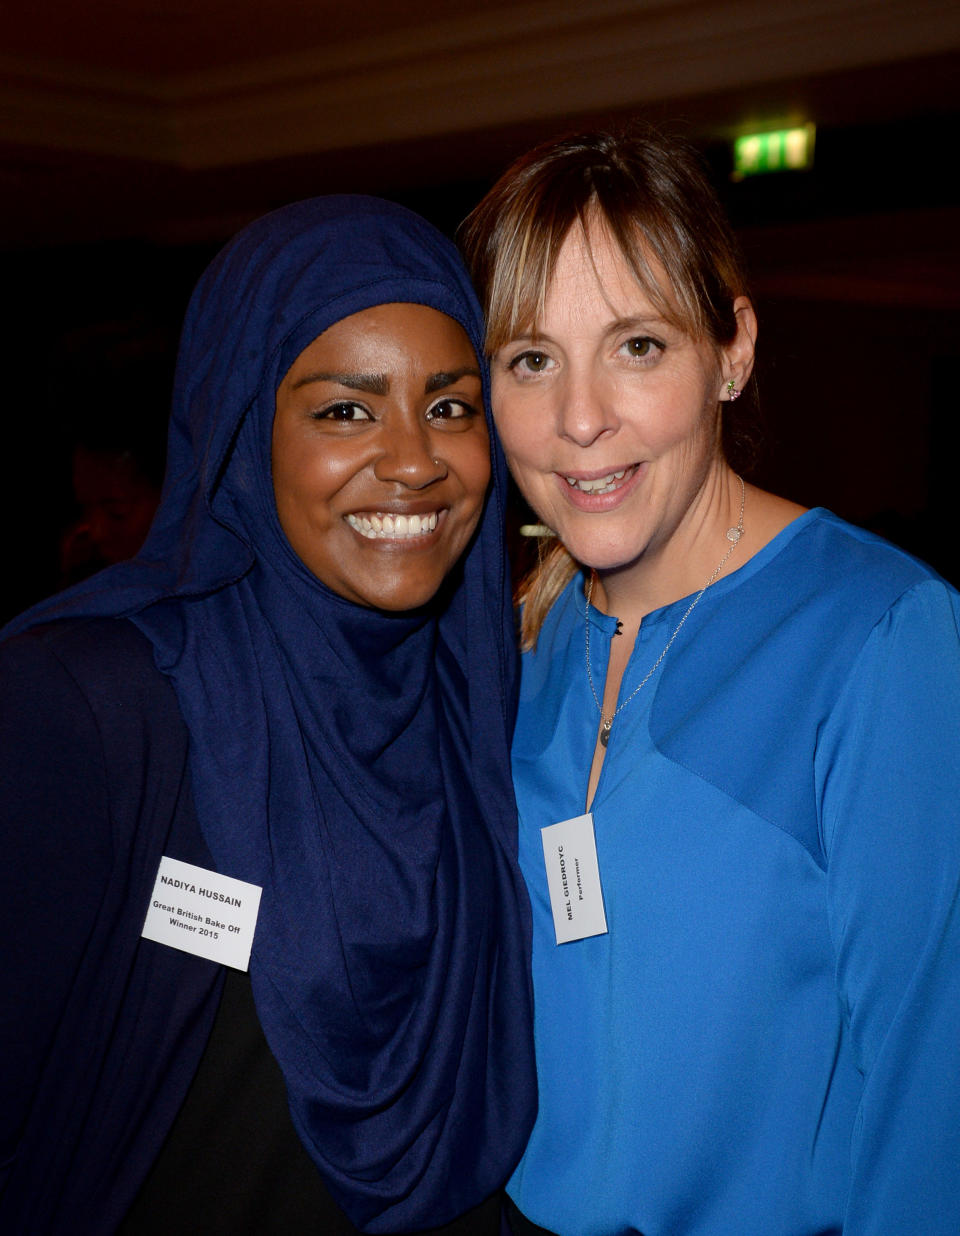 Nadiya Hussain (left) and Mel Giedroyc attend the Women of the Year Awards 2015 at the InterContinental hotel, London.